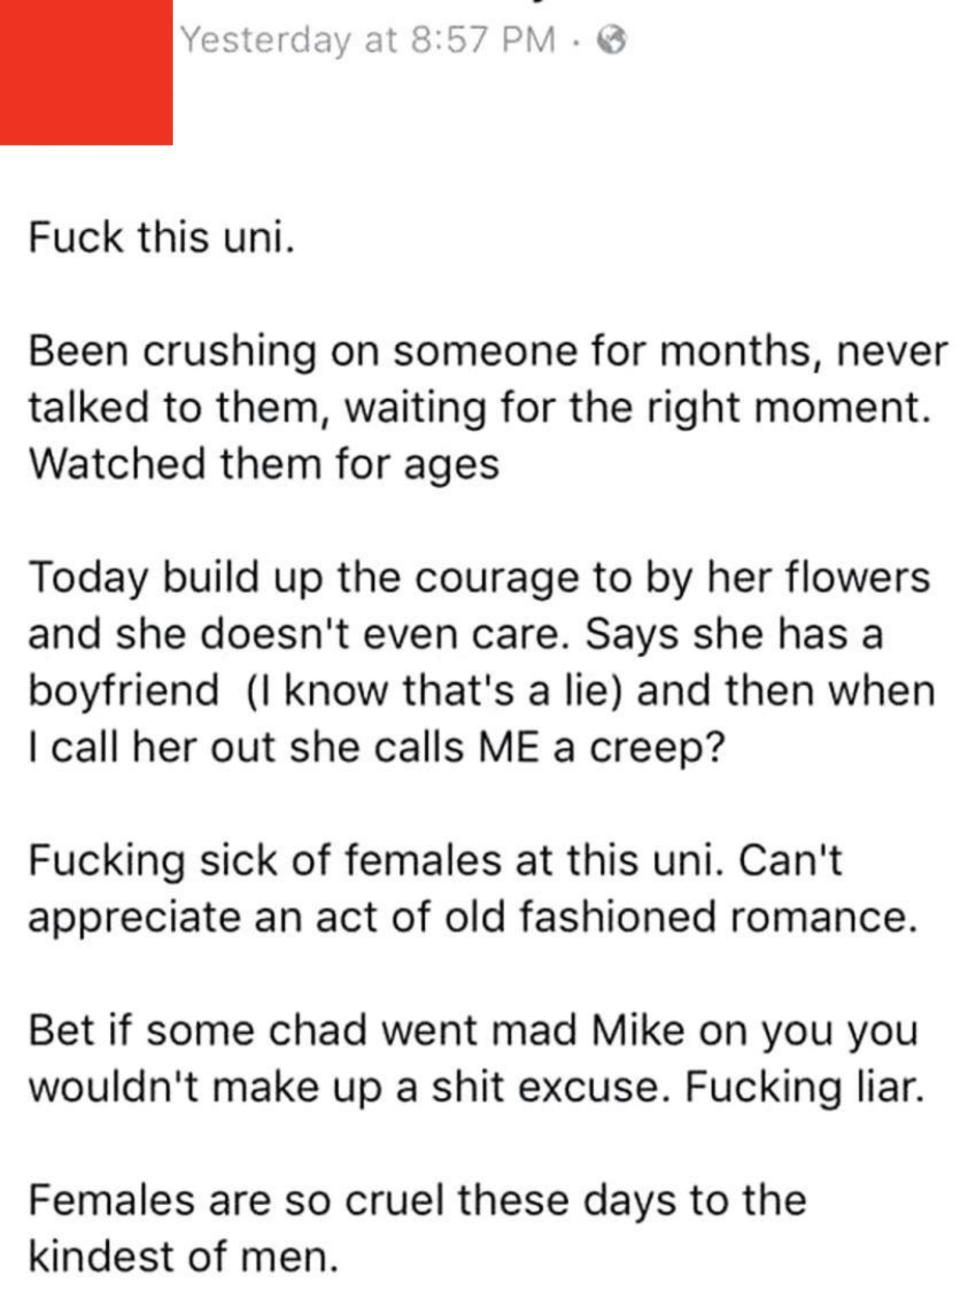 Guy says "Fuck this uni" and "females are so cruel these days to the kindest of men" after woman he's been "crushing on for ages" and "watching for ages" says she has a boyfriend when he buys her flowers, and calls him a creep when he "calls her out"